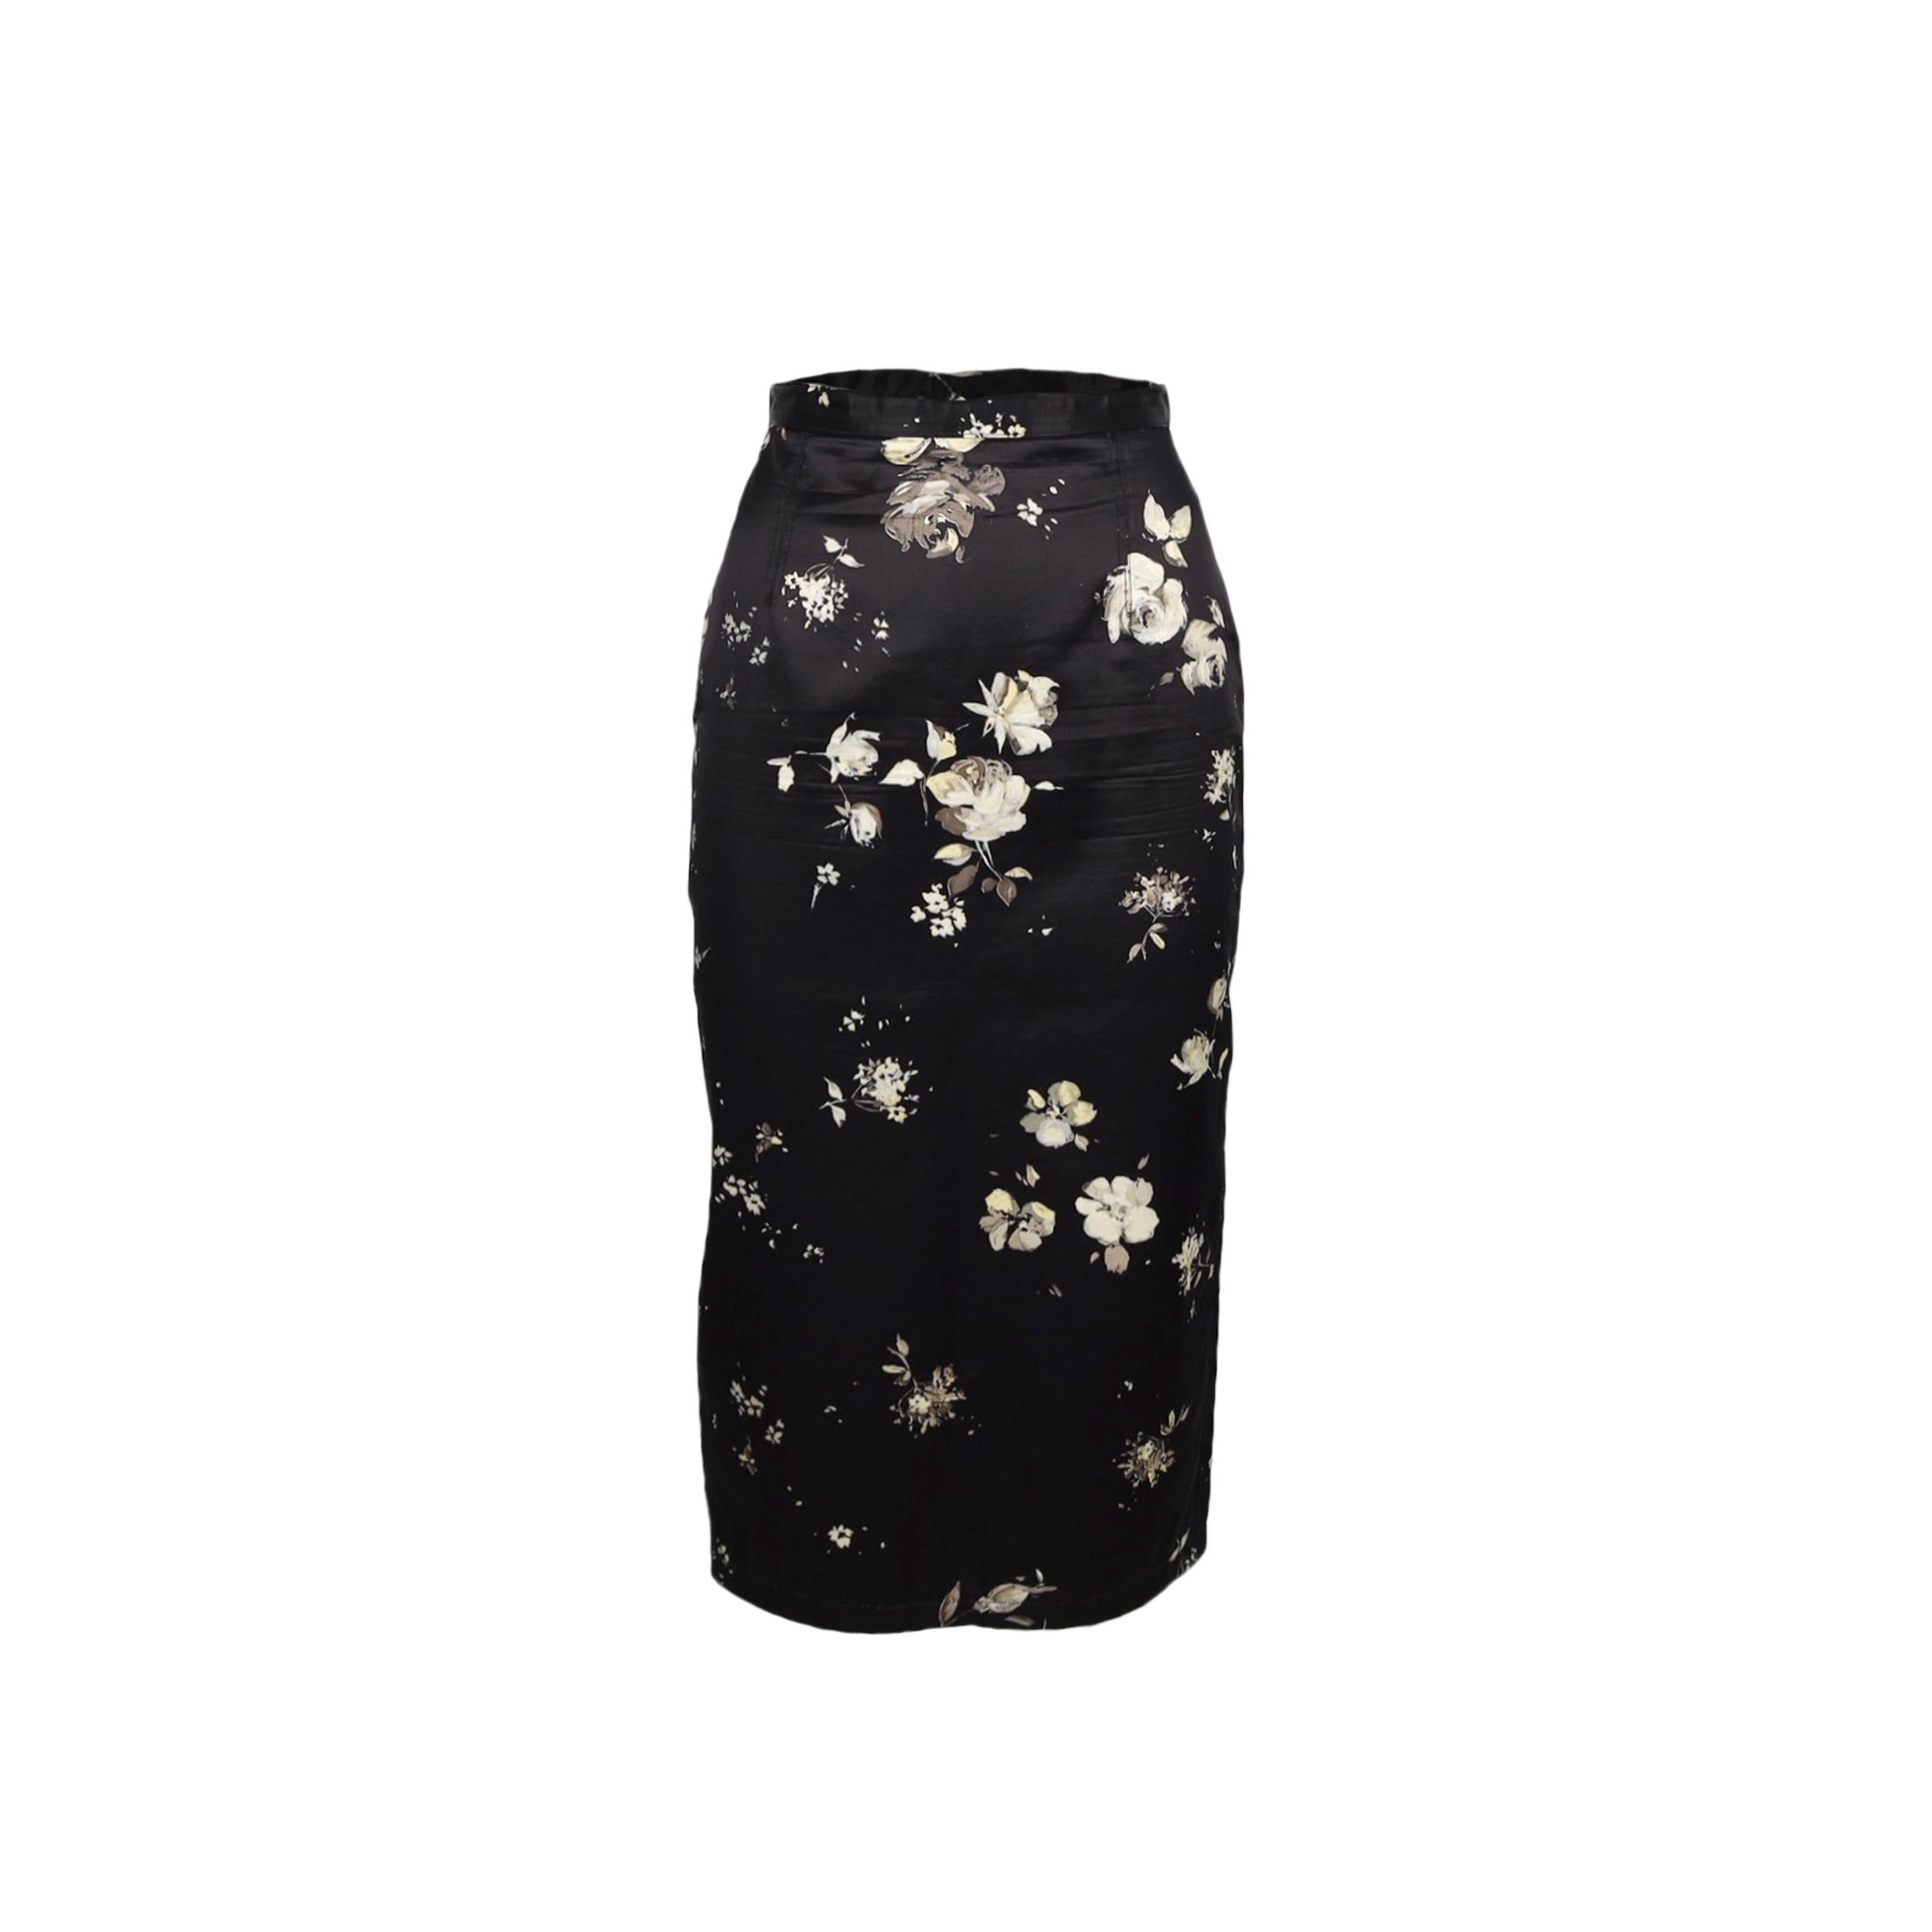 Roberto Cavalli Black Flower Printed Skirt and Top Suit  For Sale 1